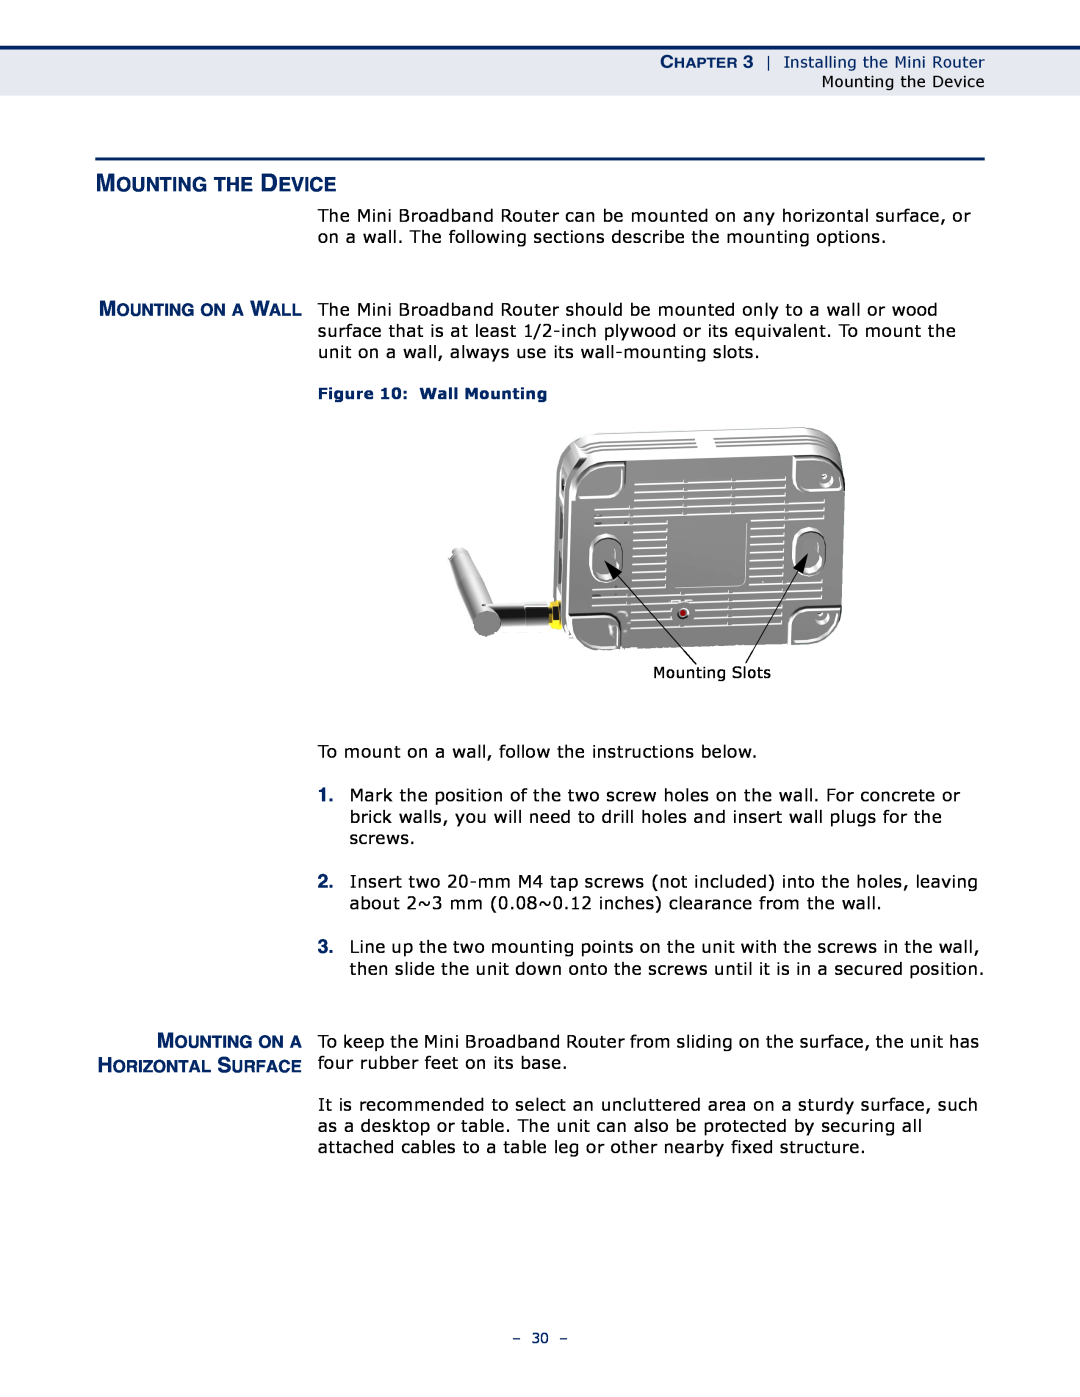 SMC Networks SMCWBR11S-N manual Mounting The Device, Mounting On A Horizontal Surface 